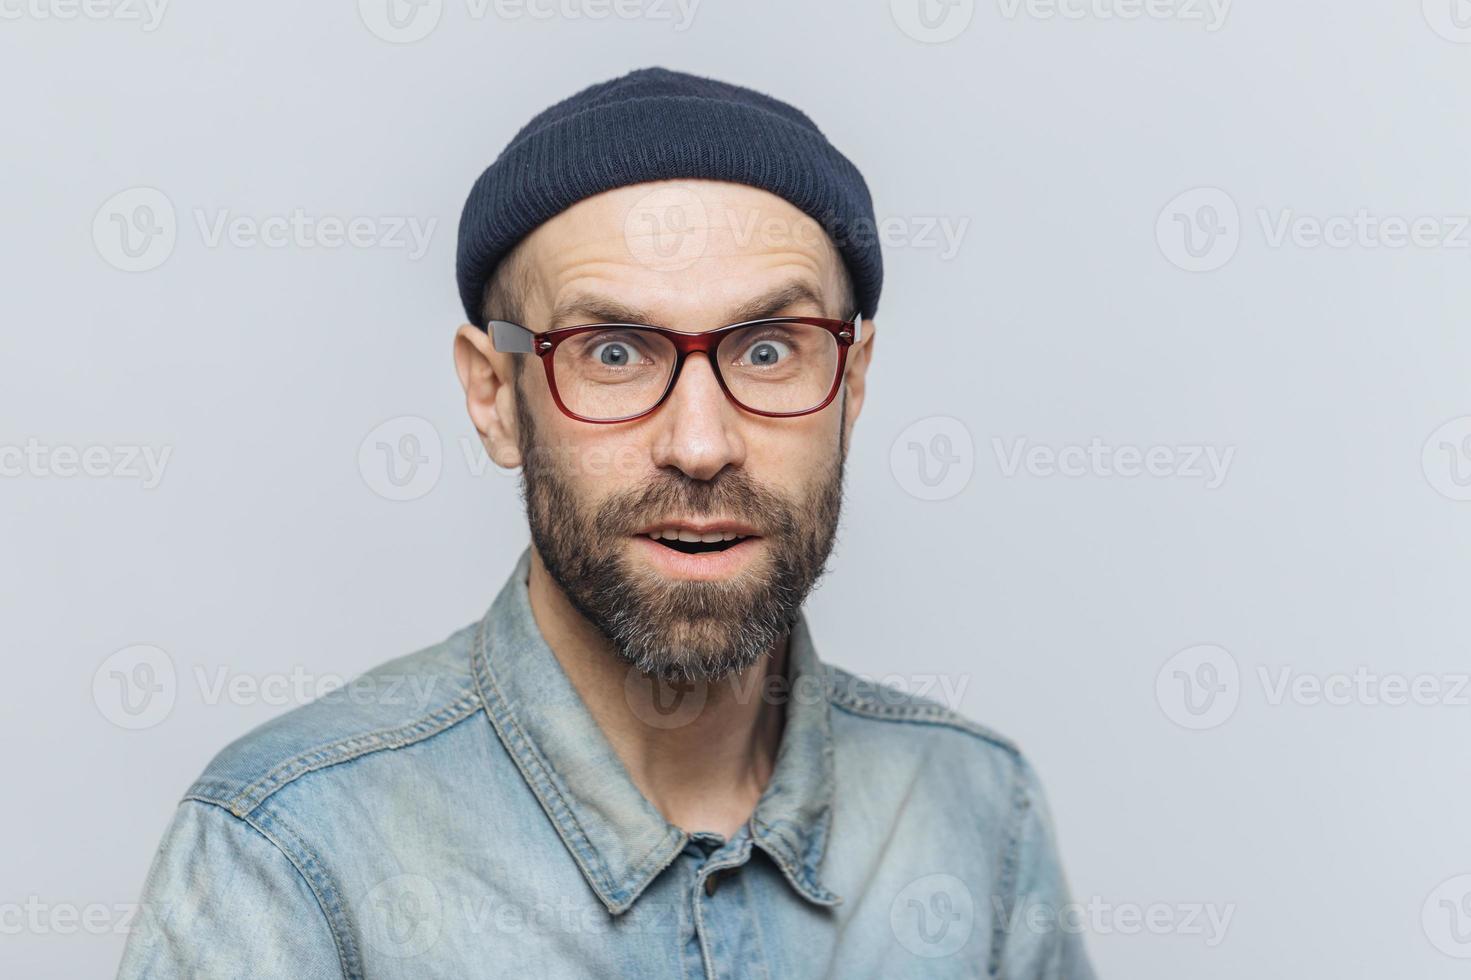 Headshot Of Good Looking Unshaven Male With Blue Eyes Looks With Suprised Expression Into Camera Feels Excited And Shocked With Latest News Poses Against Grey Background Surprisment And People Stock Photo